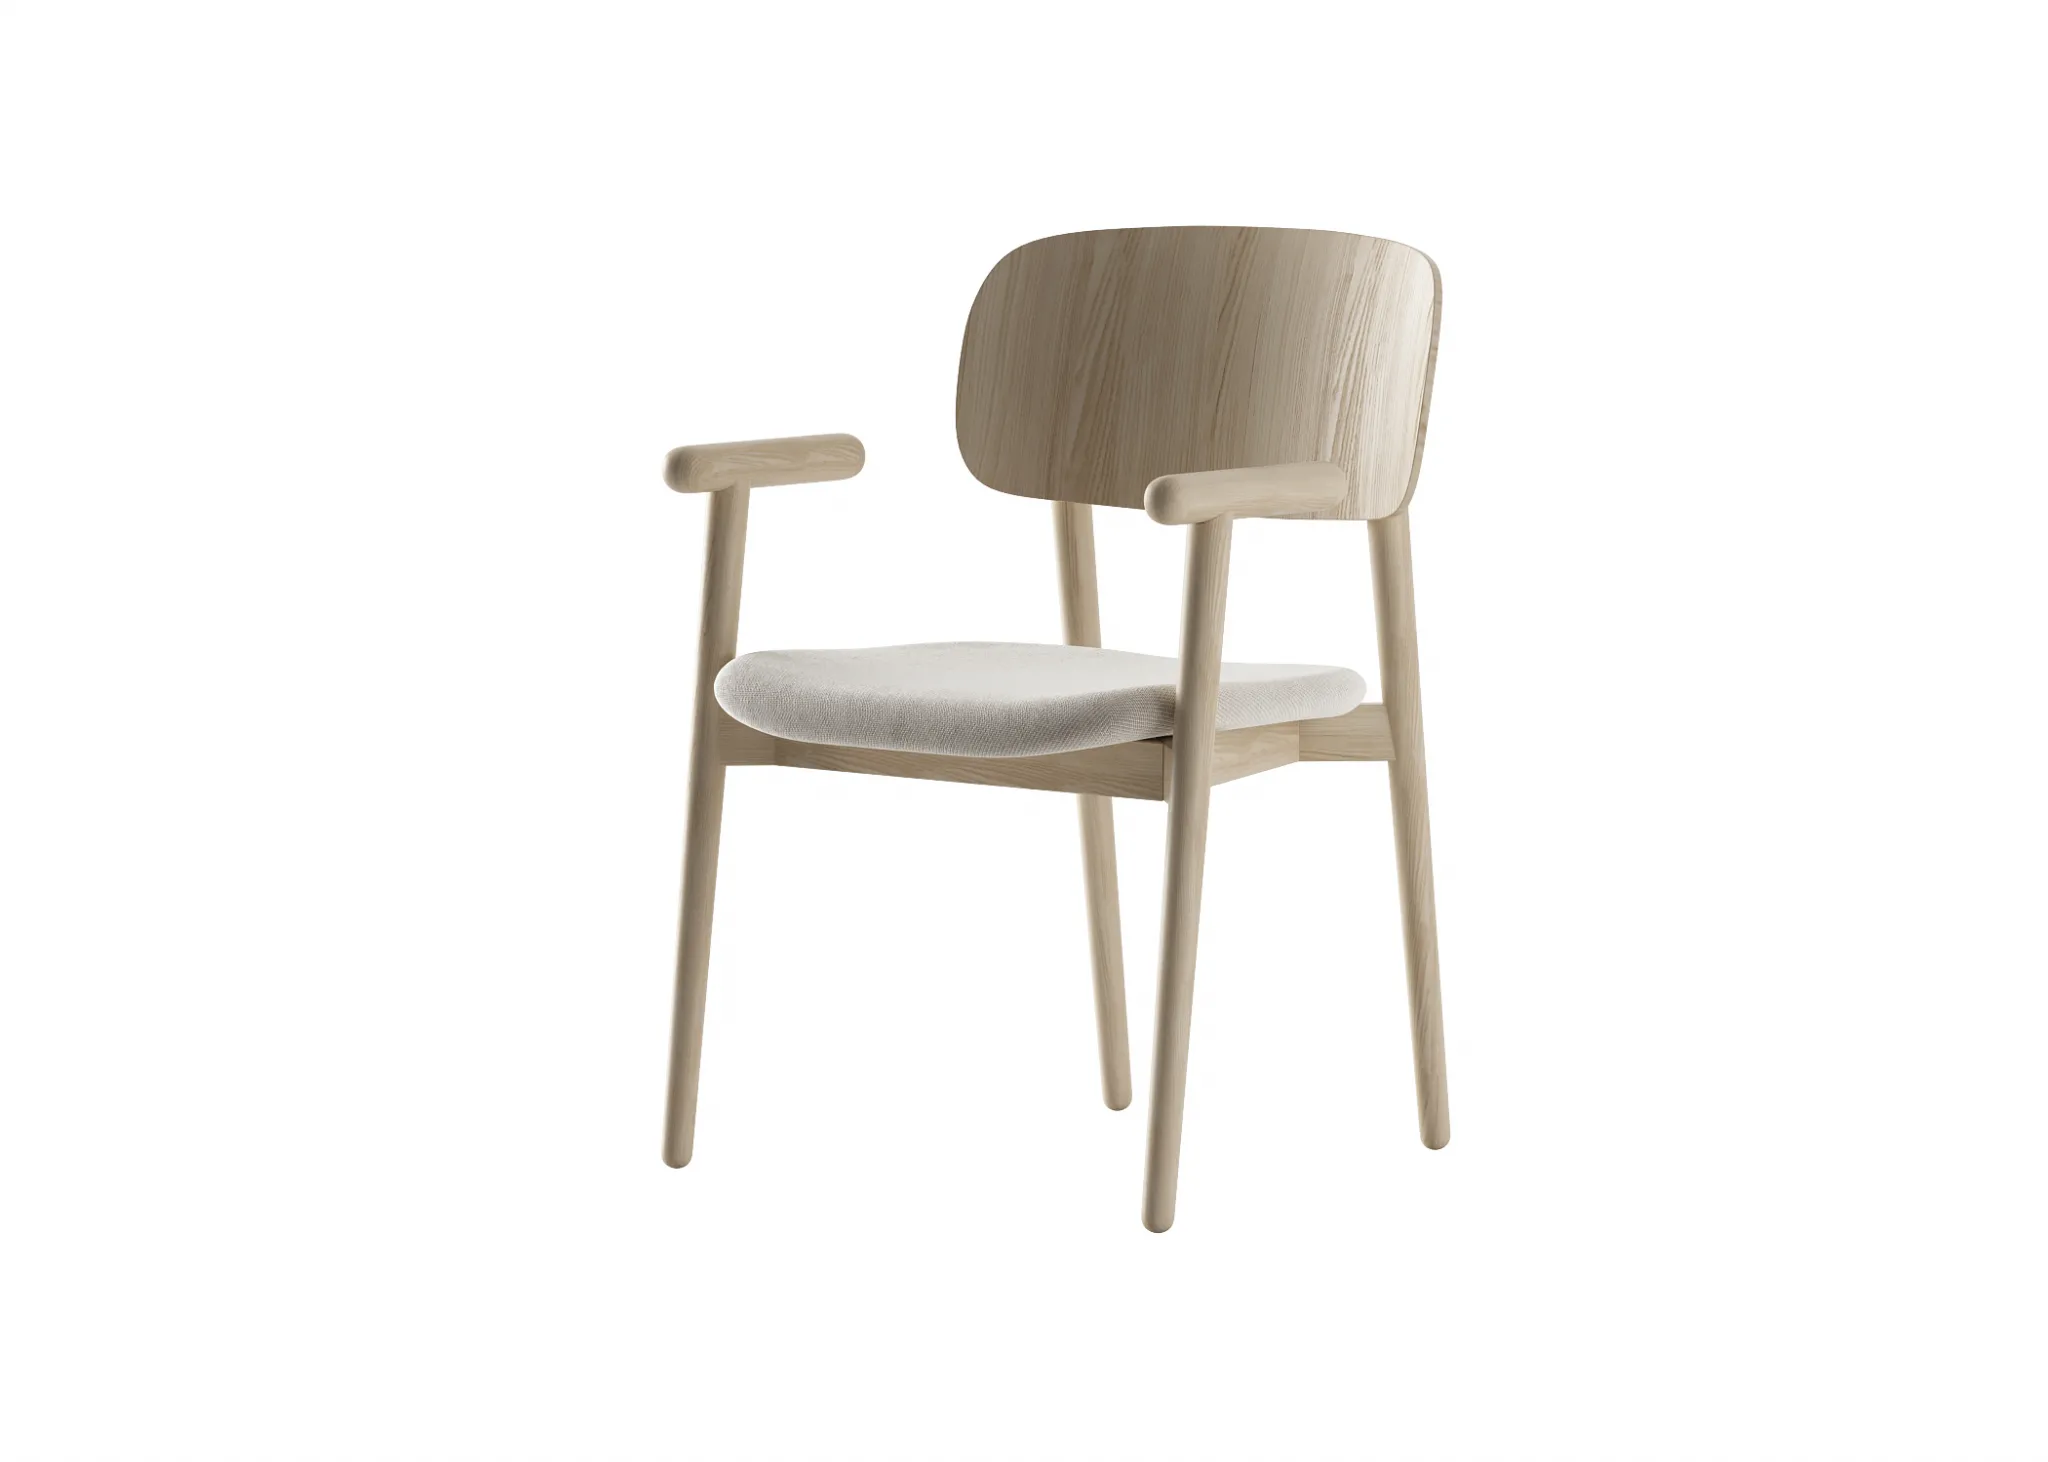 FURNITURE 3D MODELS – CHAIRS – 0328